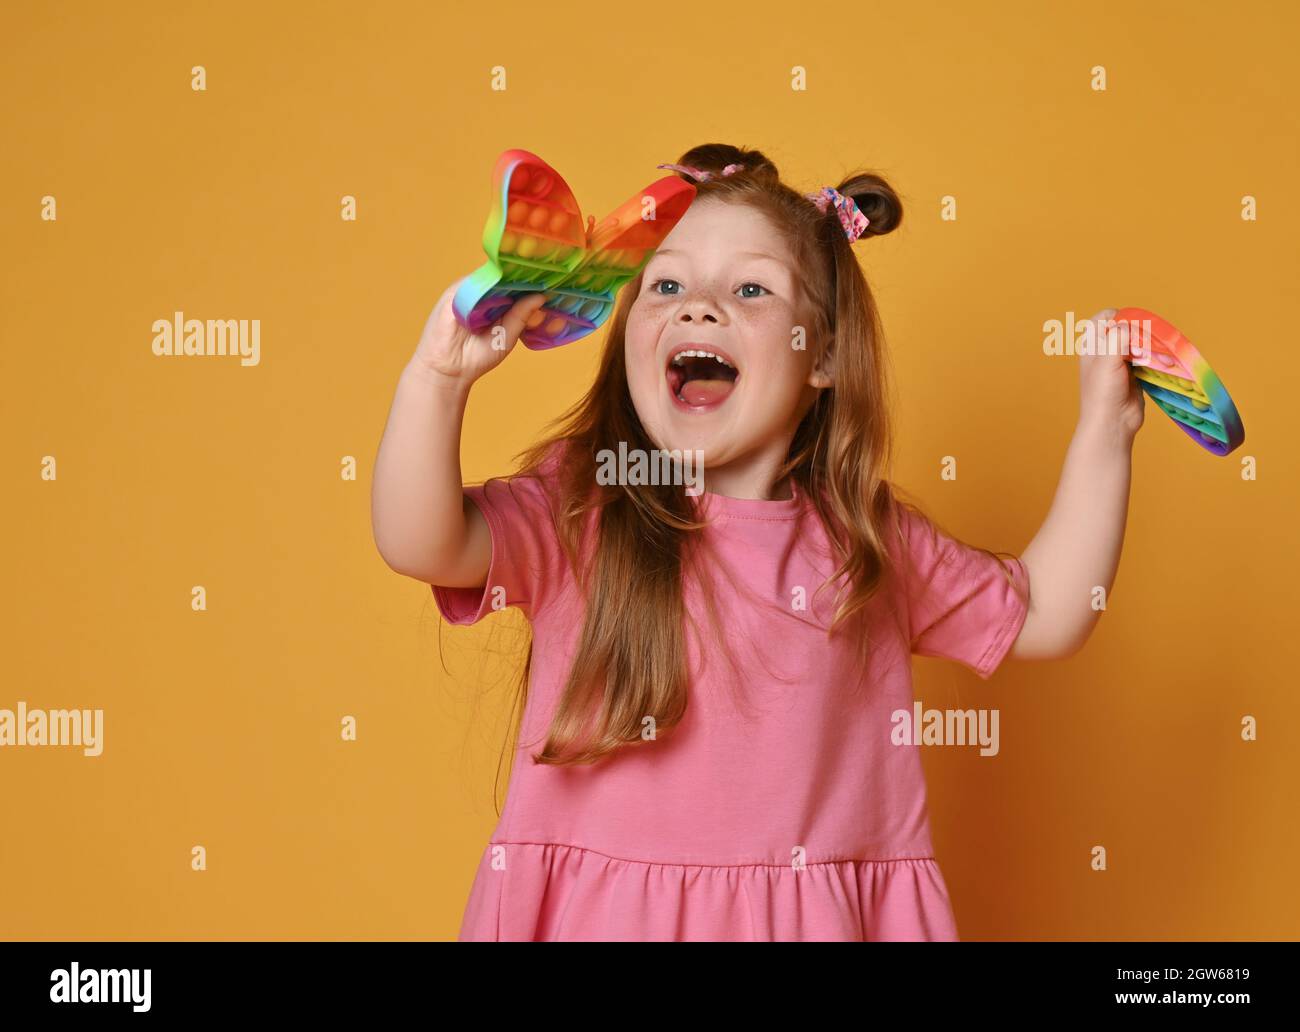 Red-haired kid girl in pink shirt plays with new sensory rainbow color toys - butterfly shape and round pop it Stock Photo